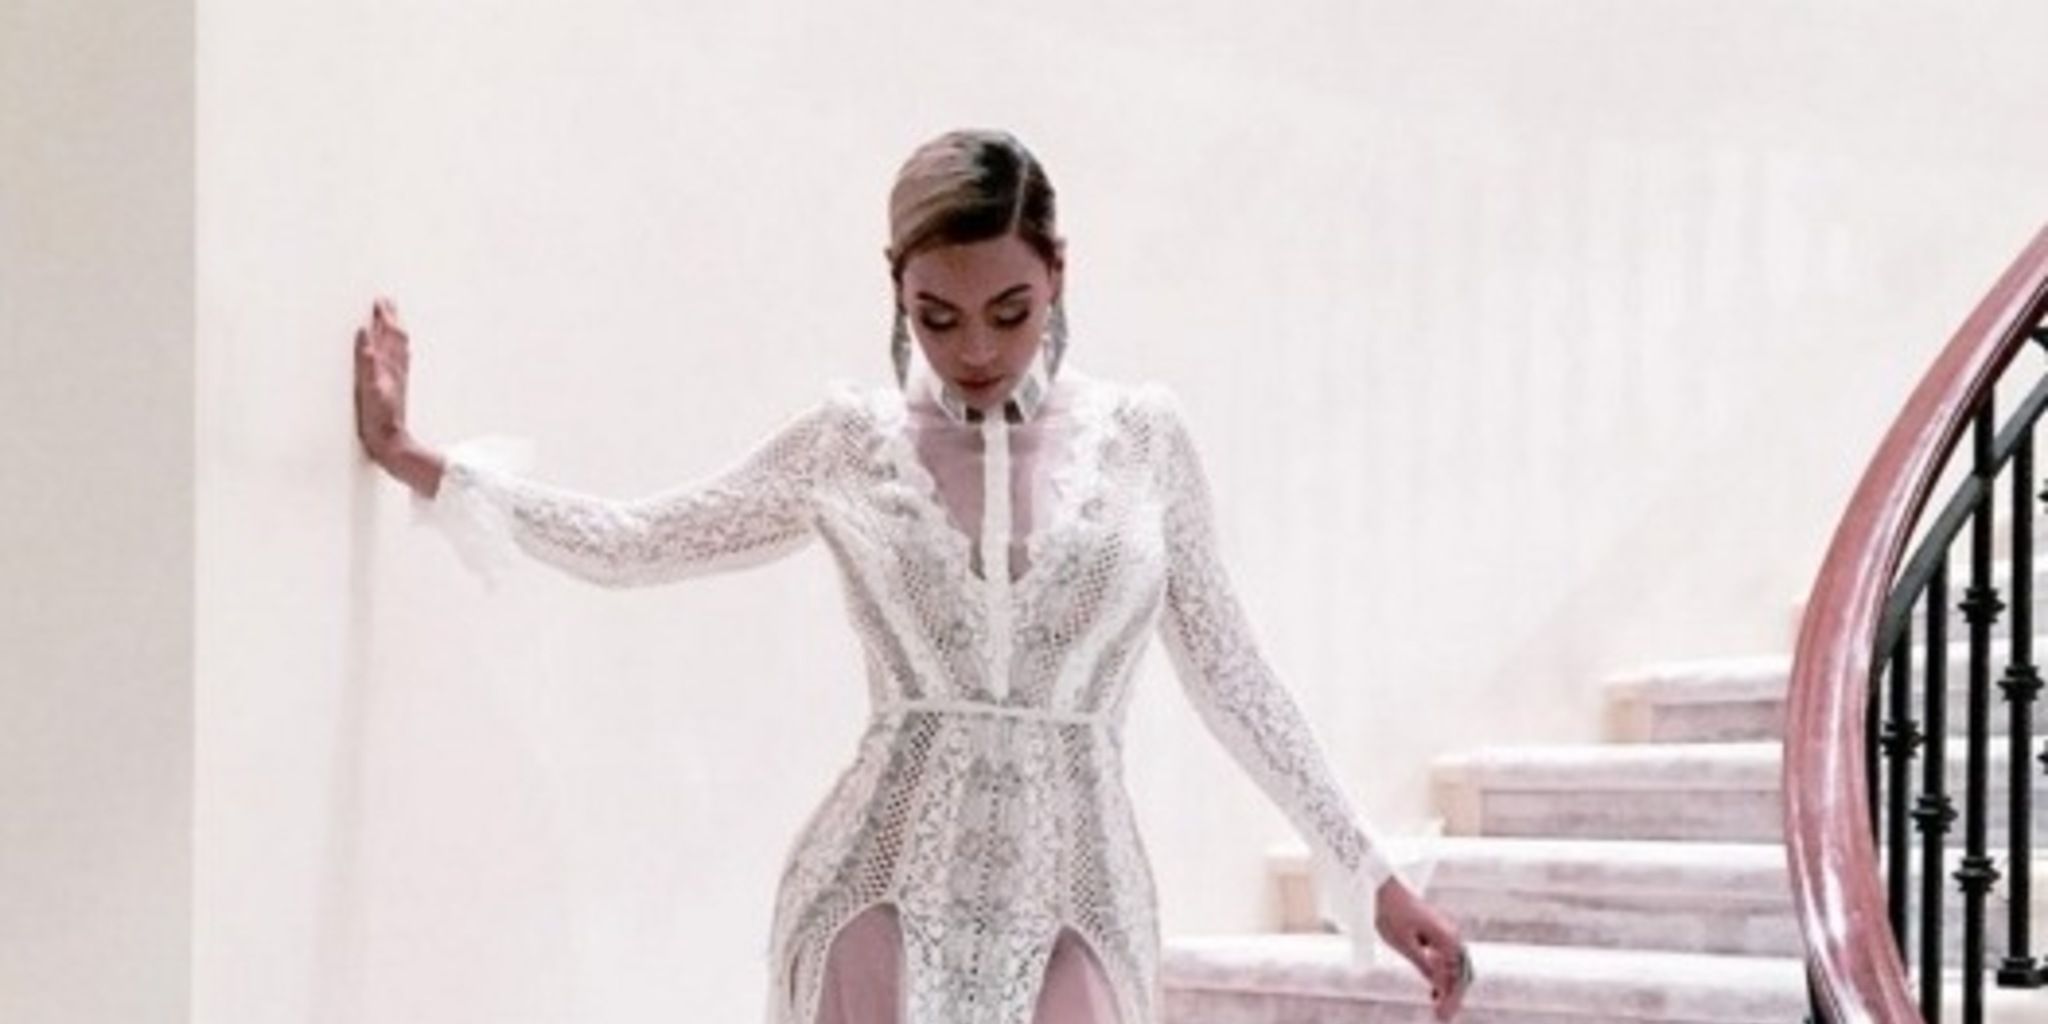 Buy Beyonce's 'Best Thing I Never Had' wedding gown | Easy Weddings